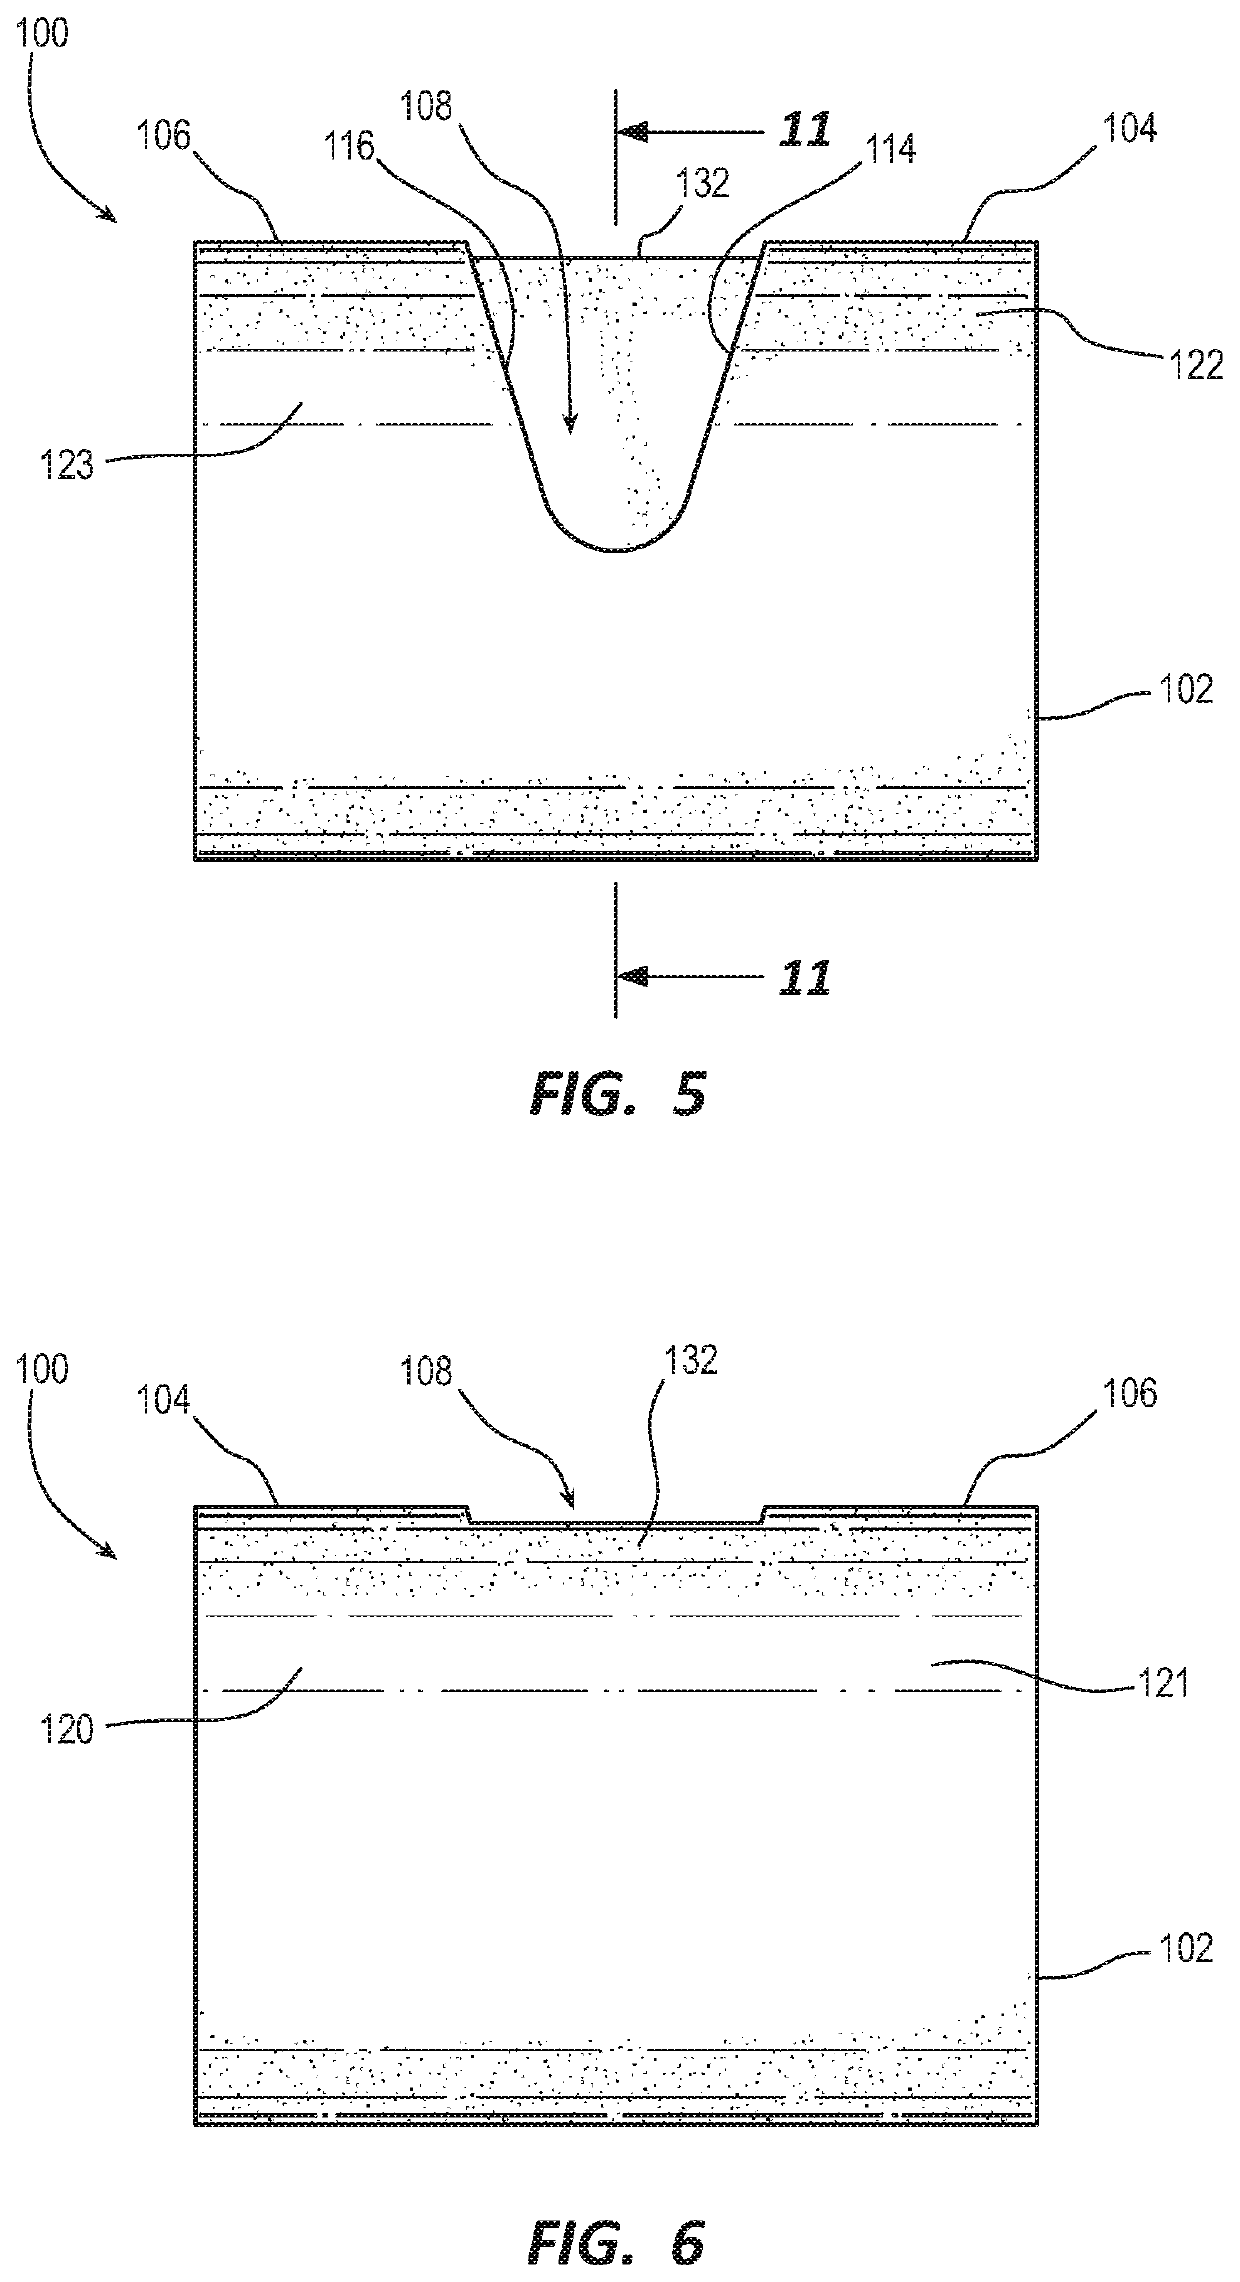 Orthopedic device for stabilizing the lower leg and enabling knee motion therapy